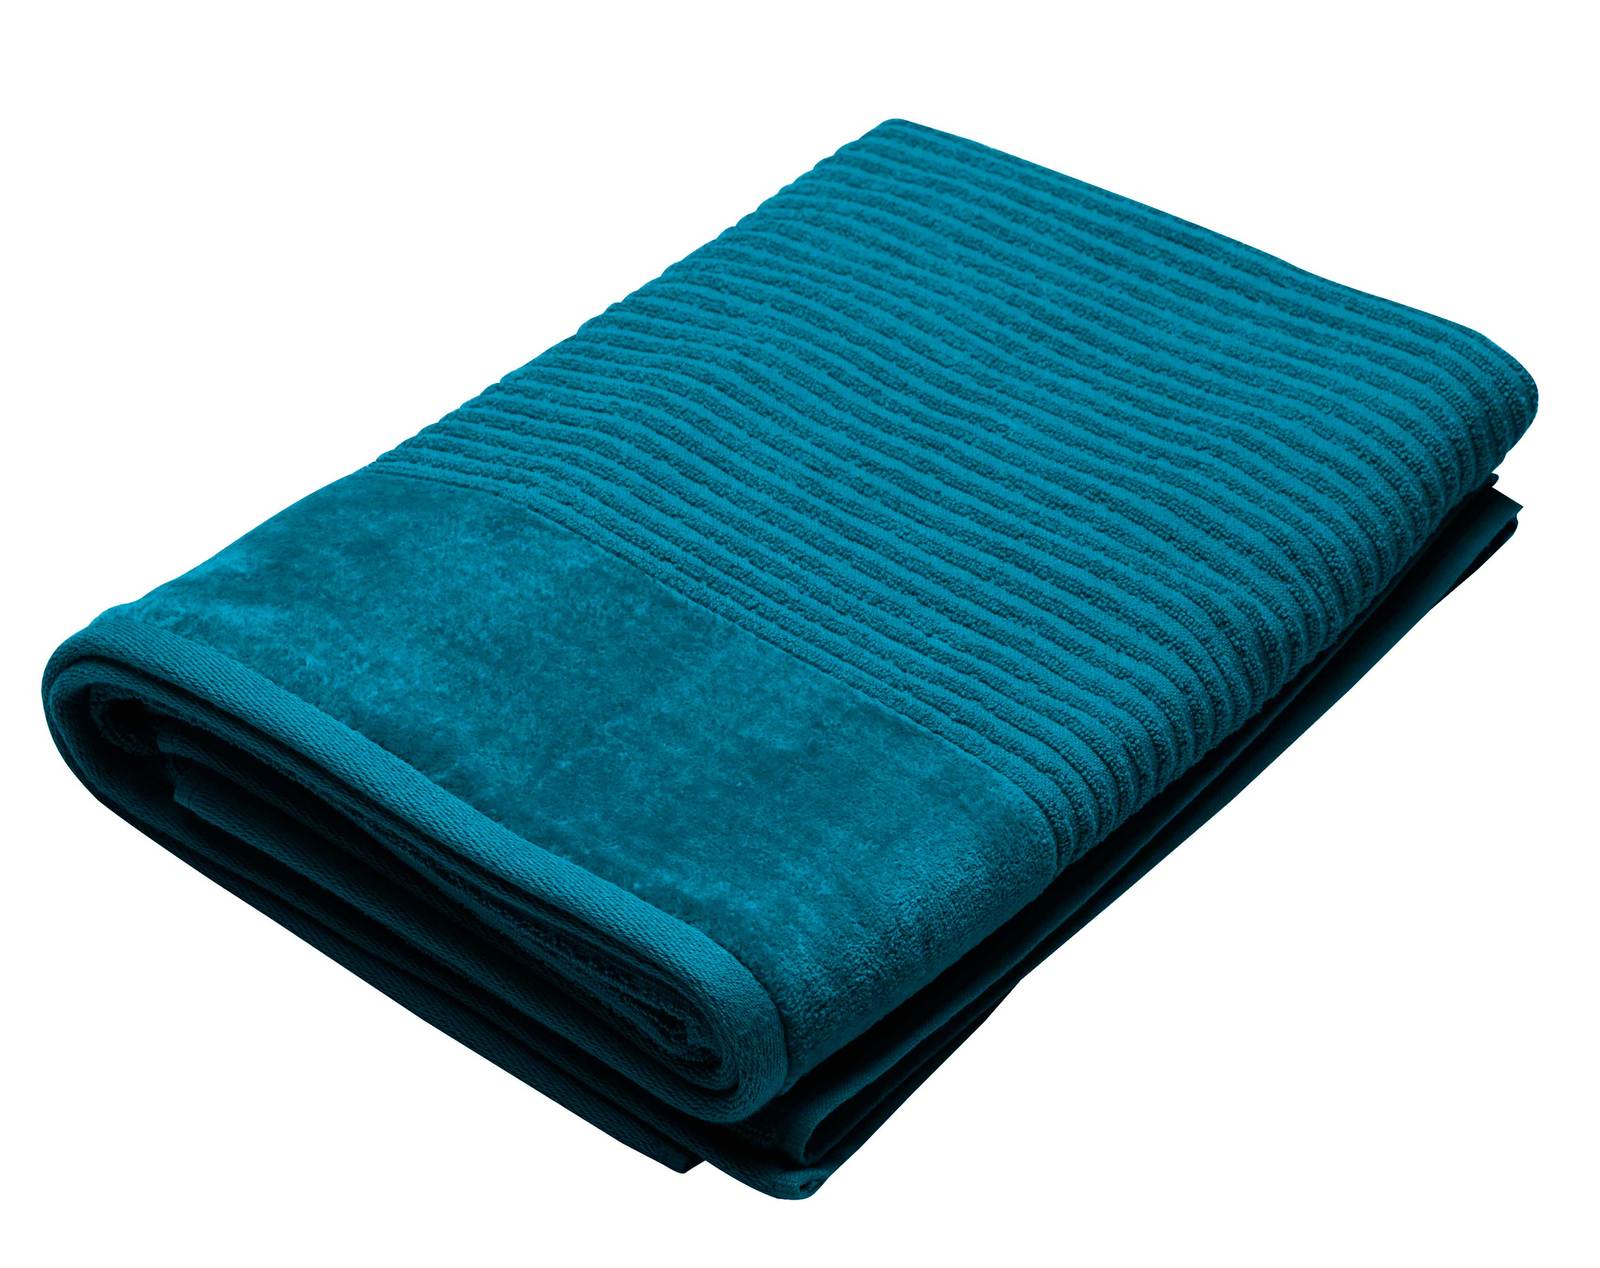 Jenny Mclean Royal Excellency Bath Towel 2 ply sheared Border 600GSM in Teal